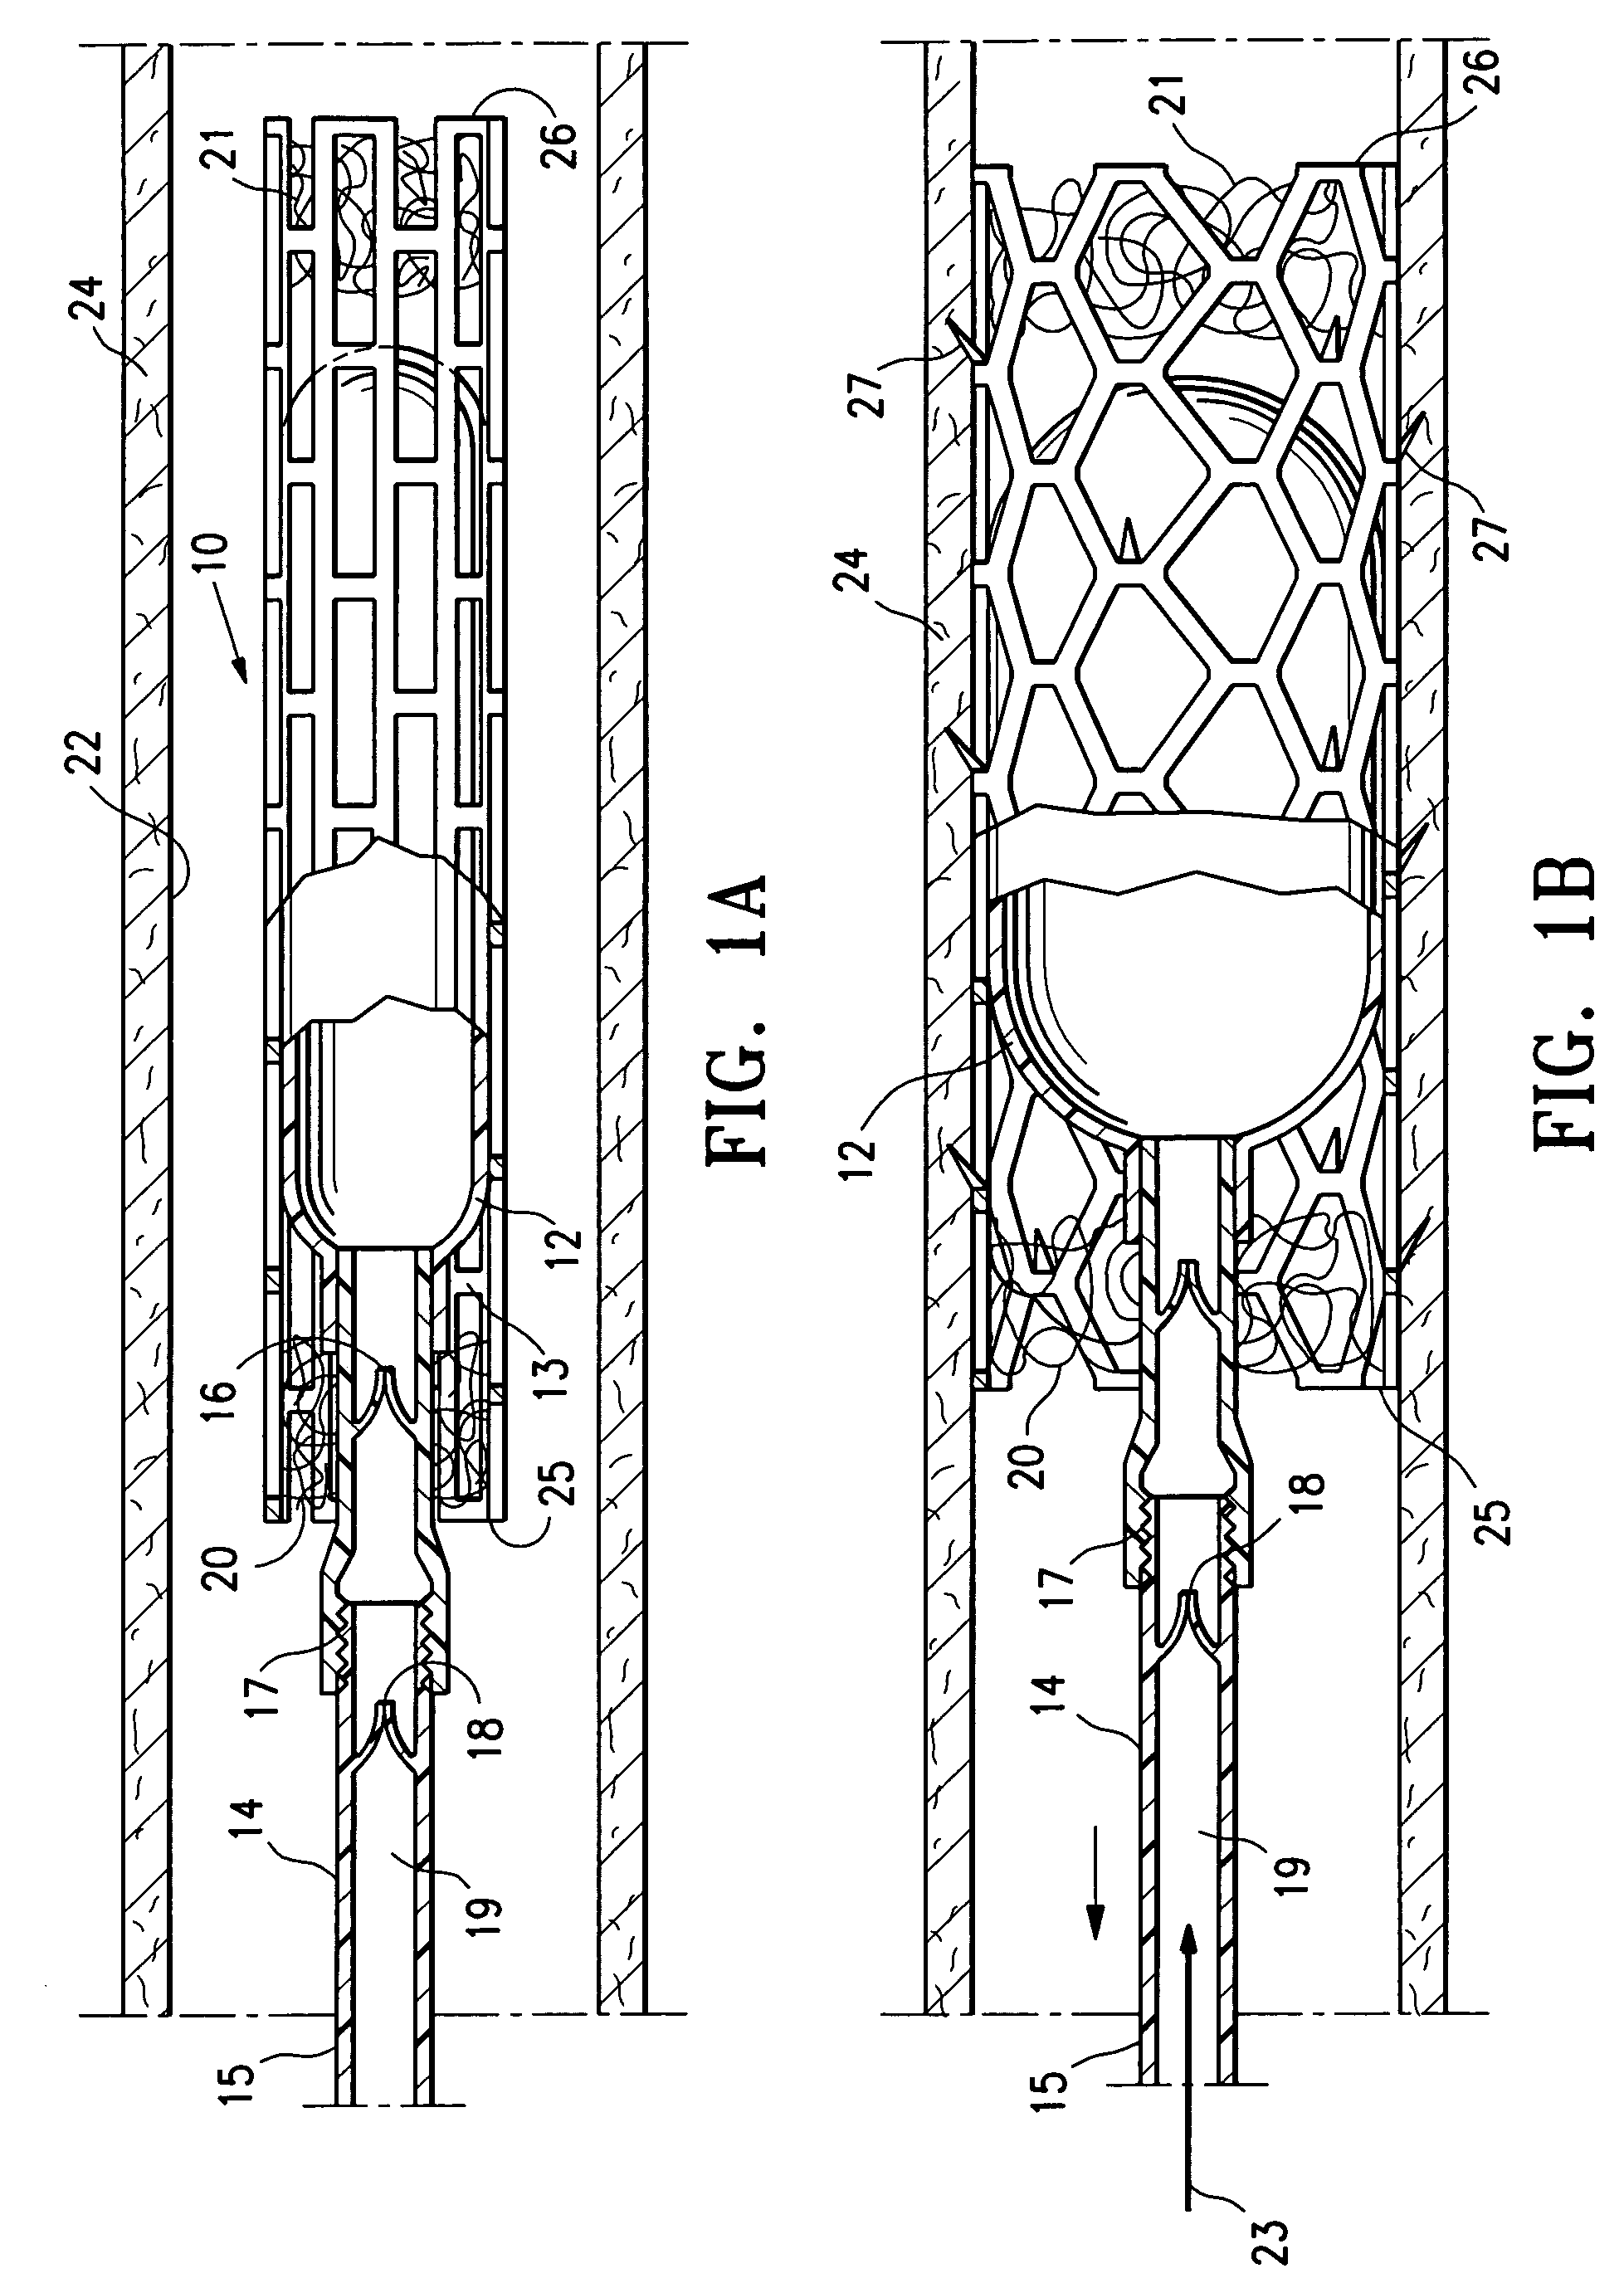 Contraceptive with permeable and impermeable components